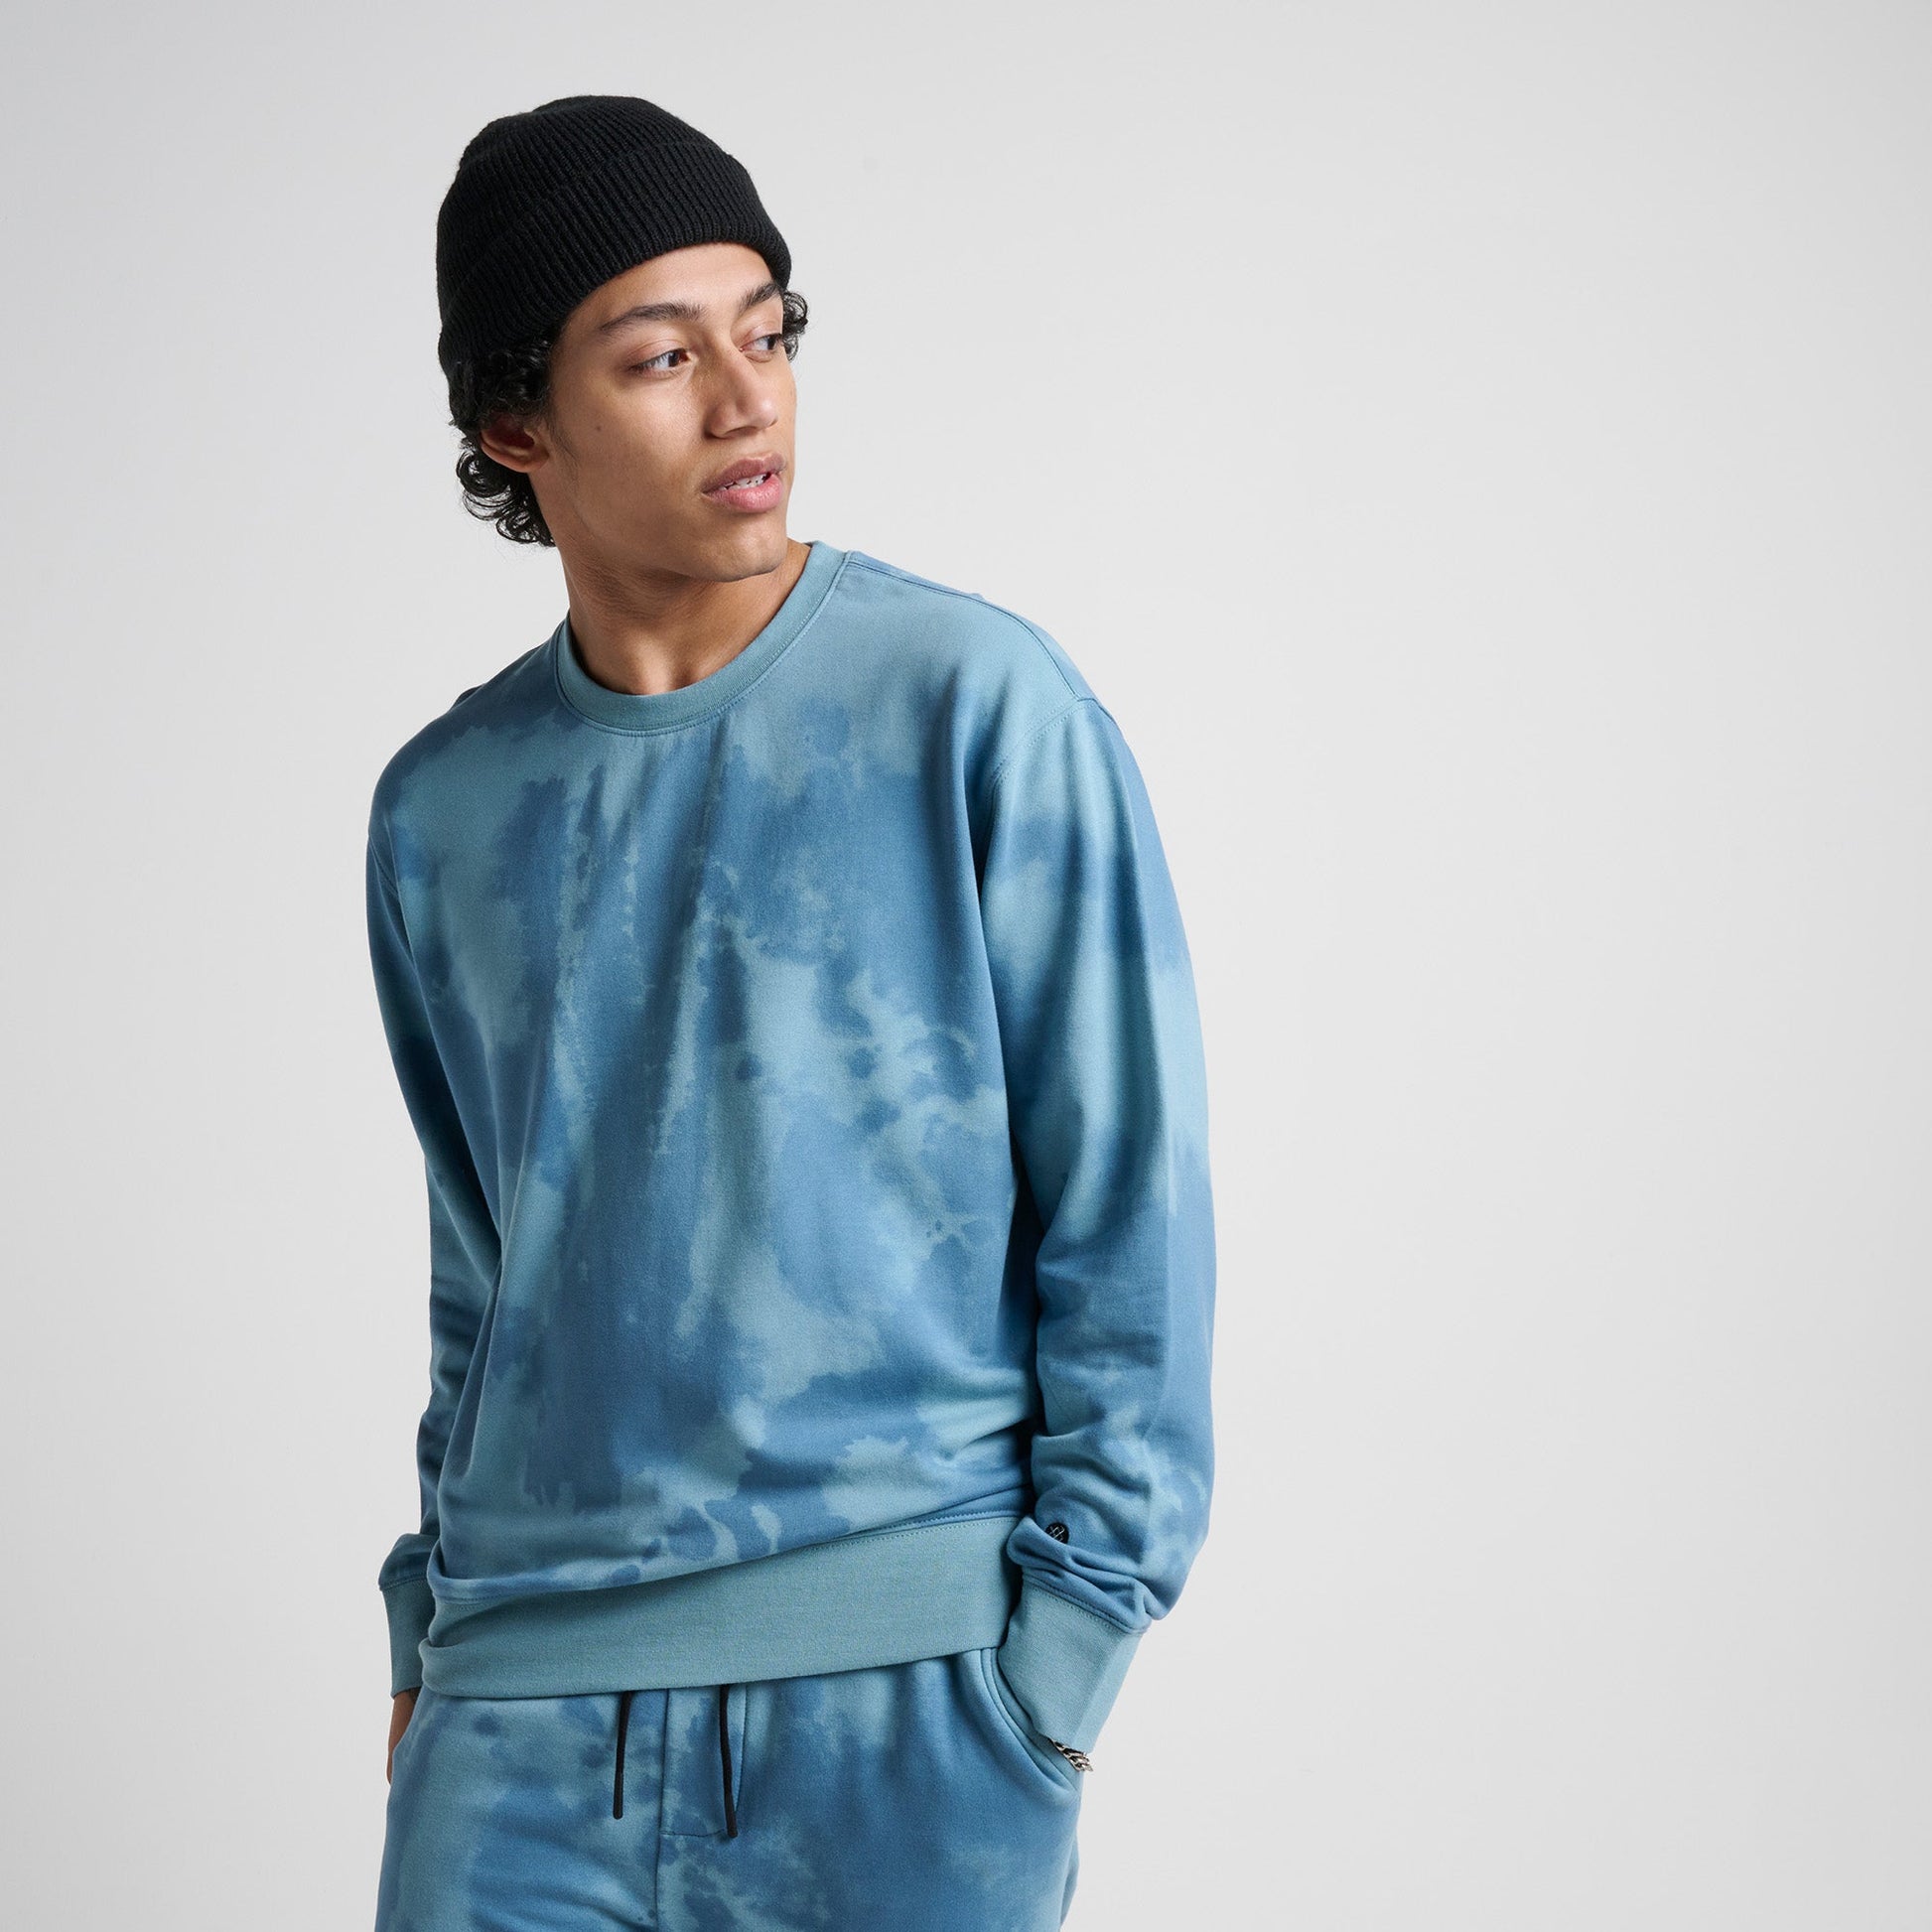 Stance Shelter Crew Blue Fade